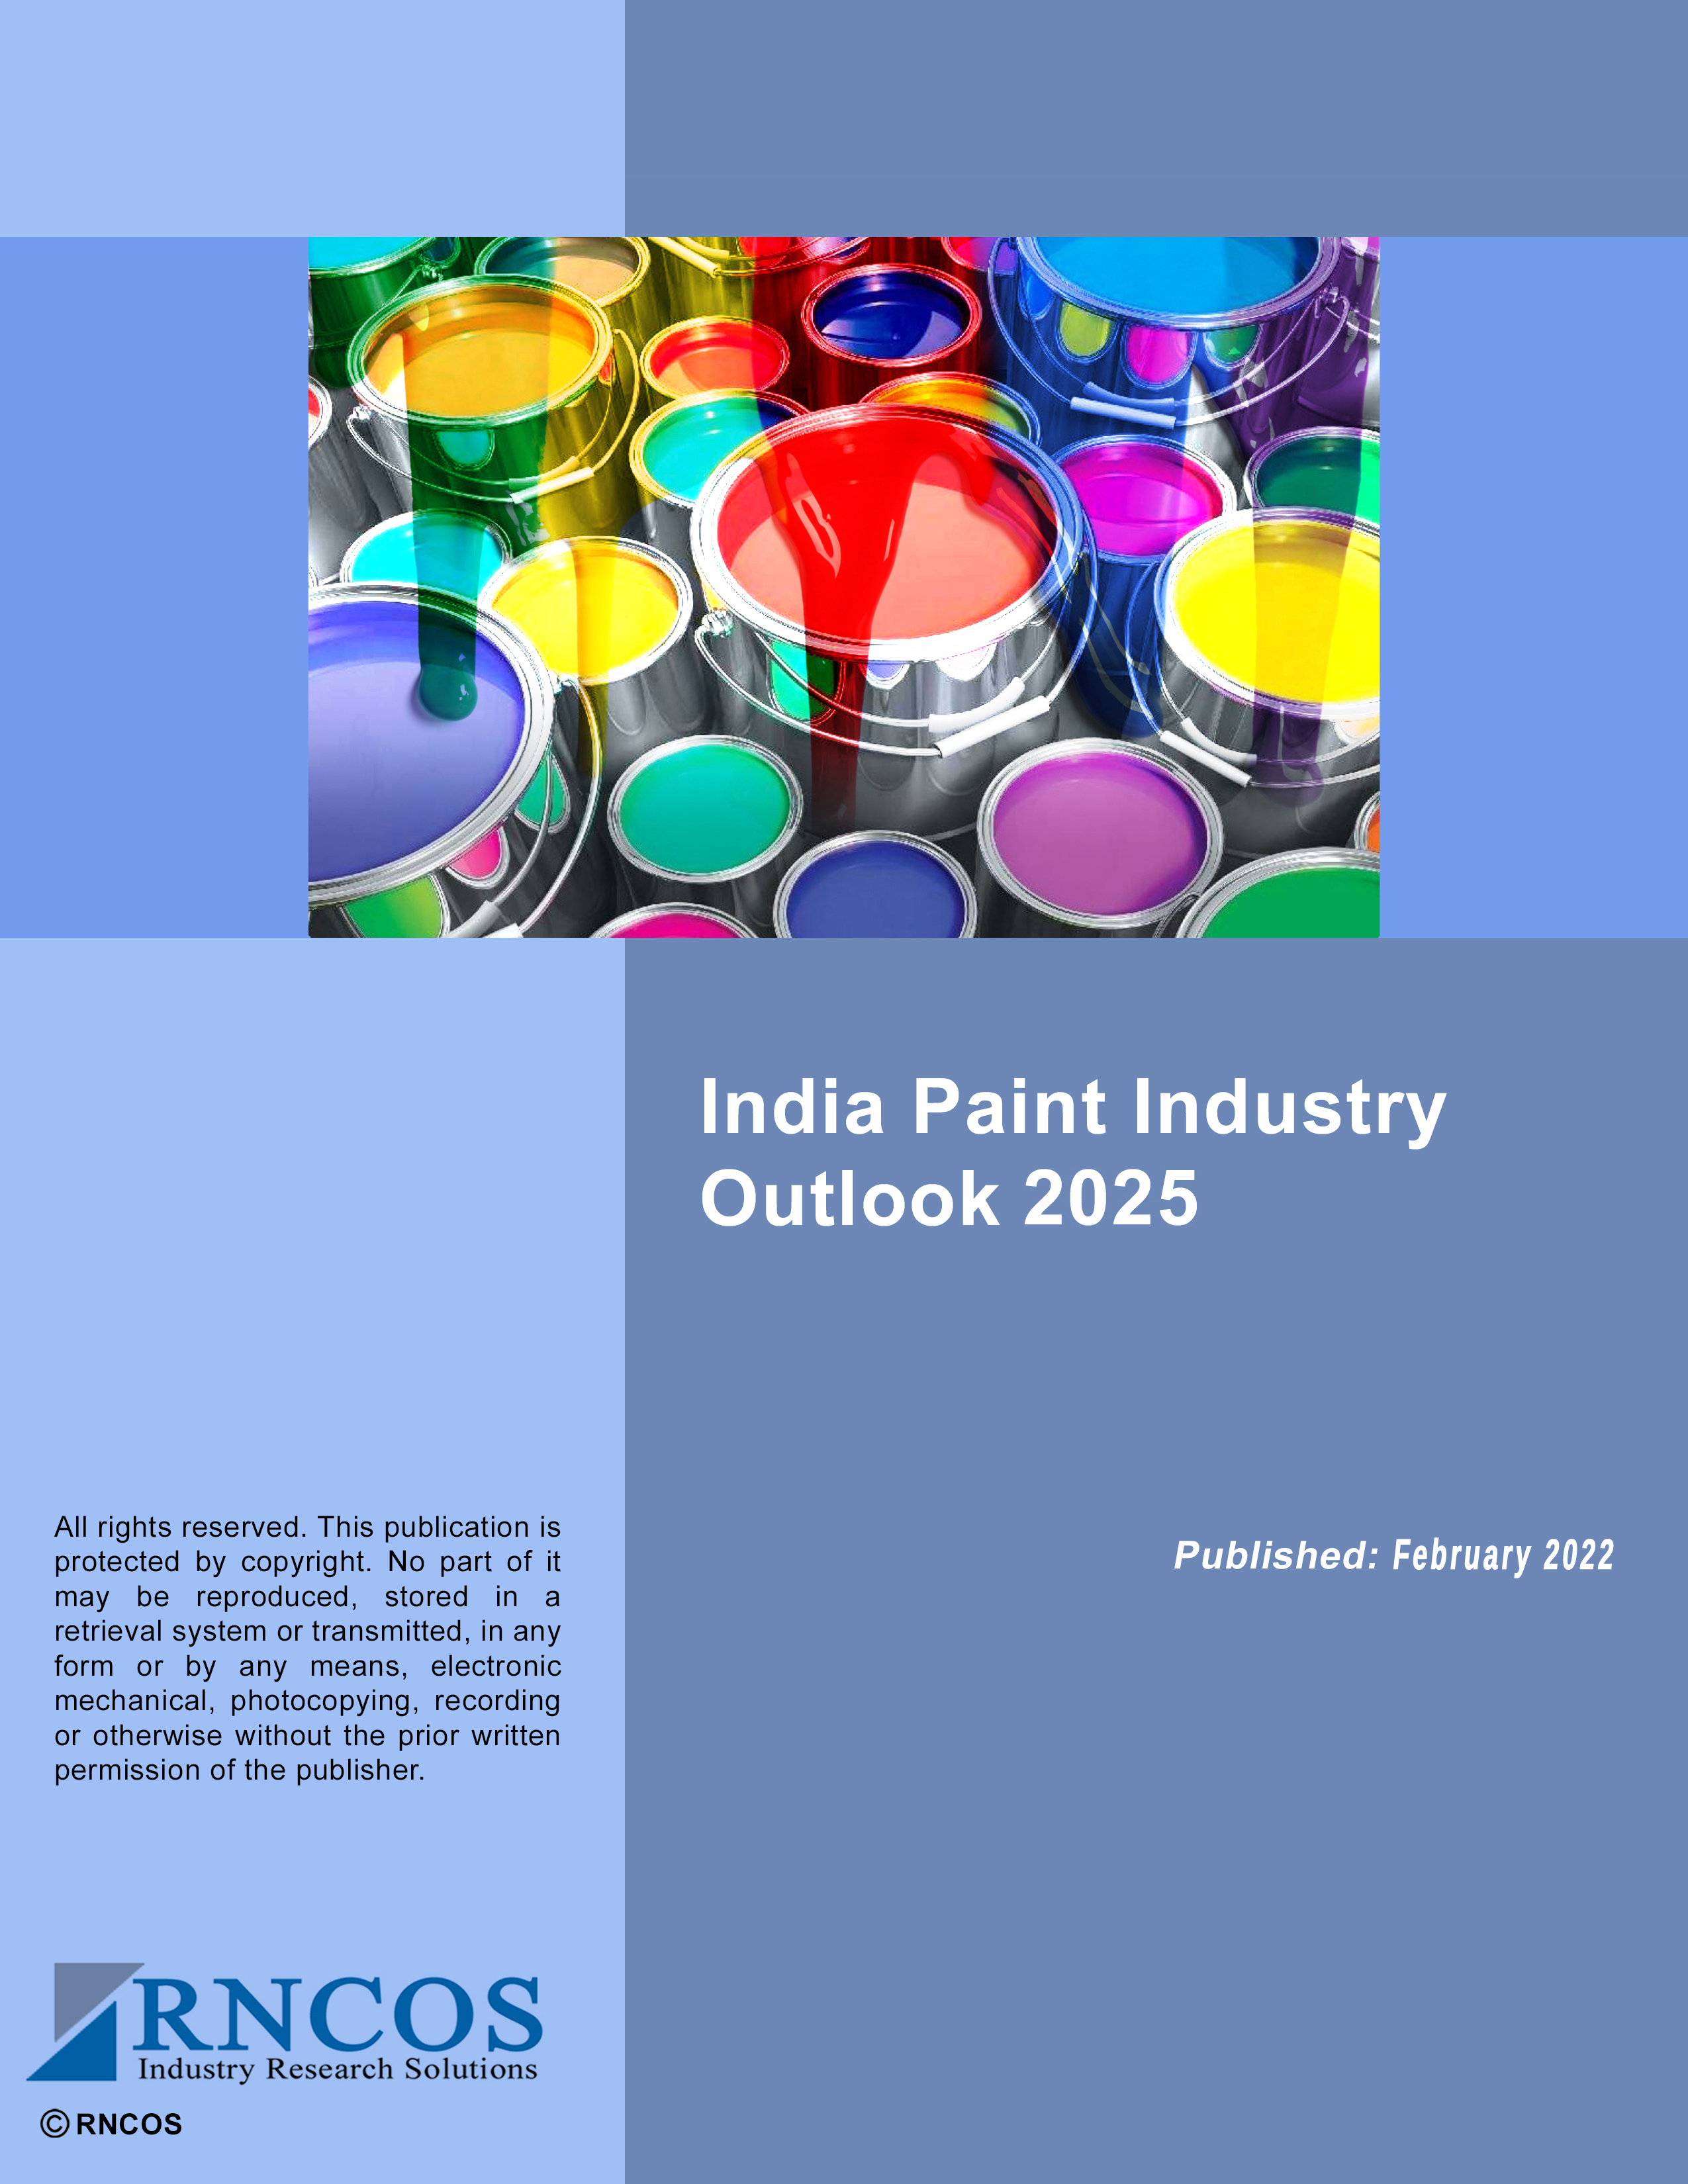 India Paint Industry Outlook 2025 Research Report